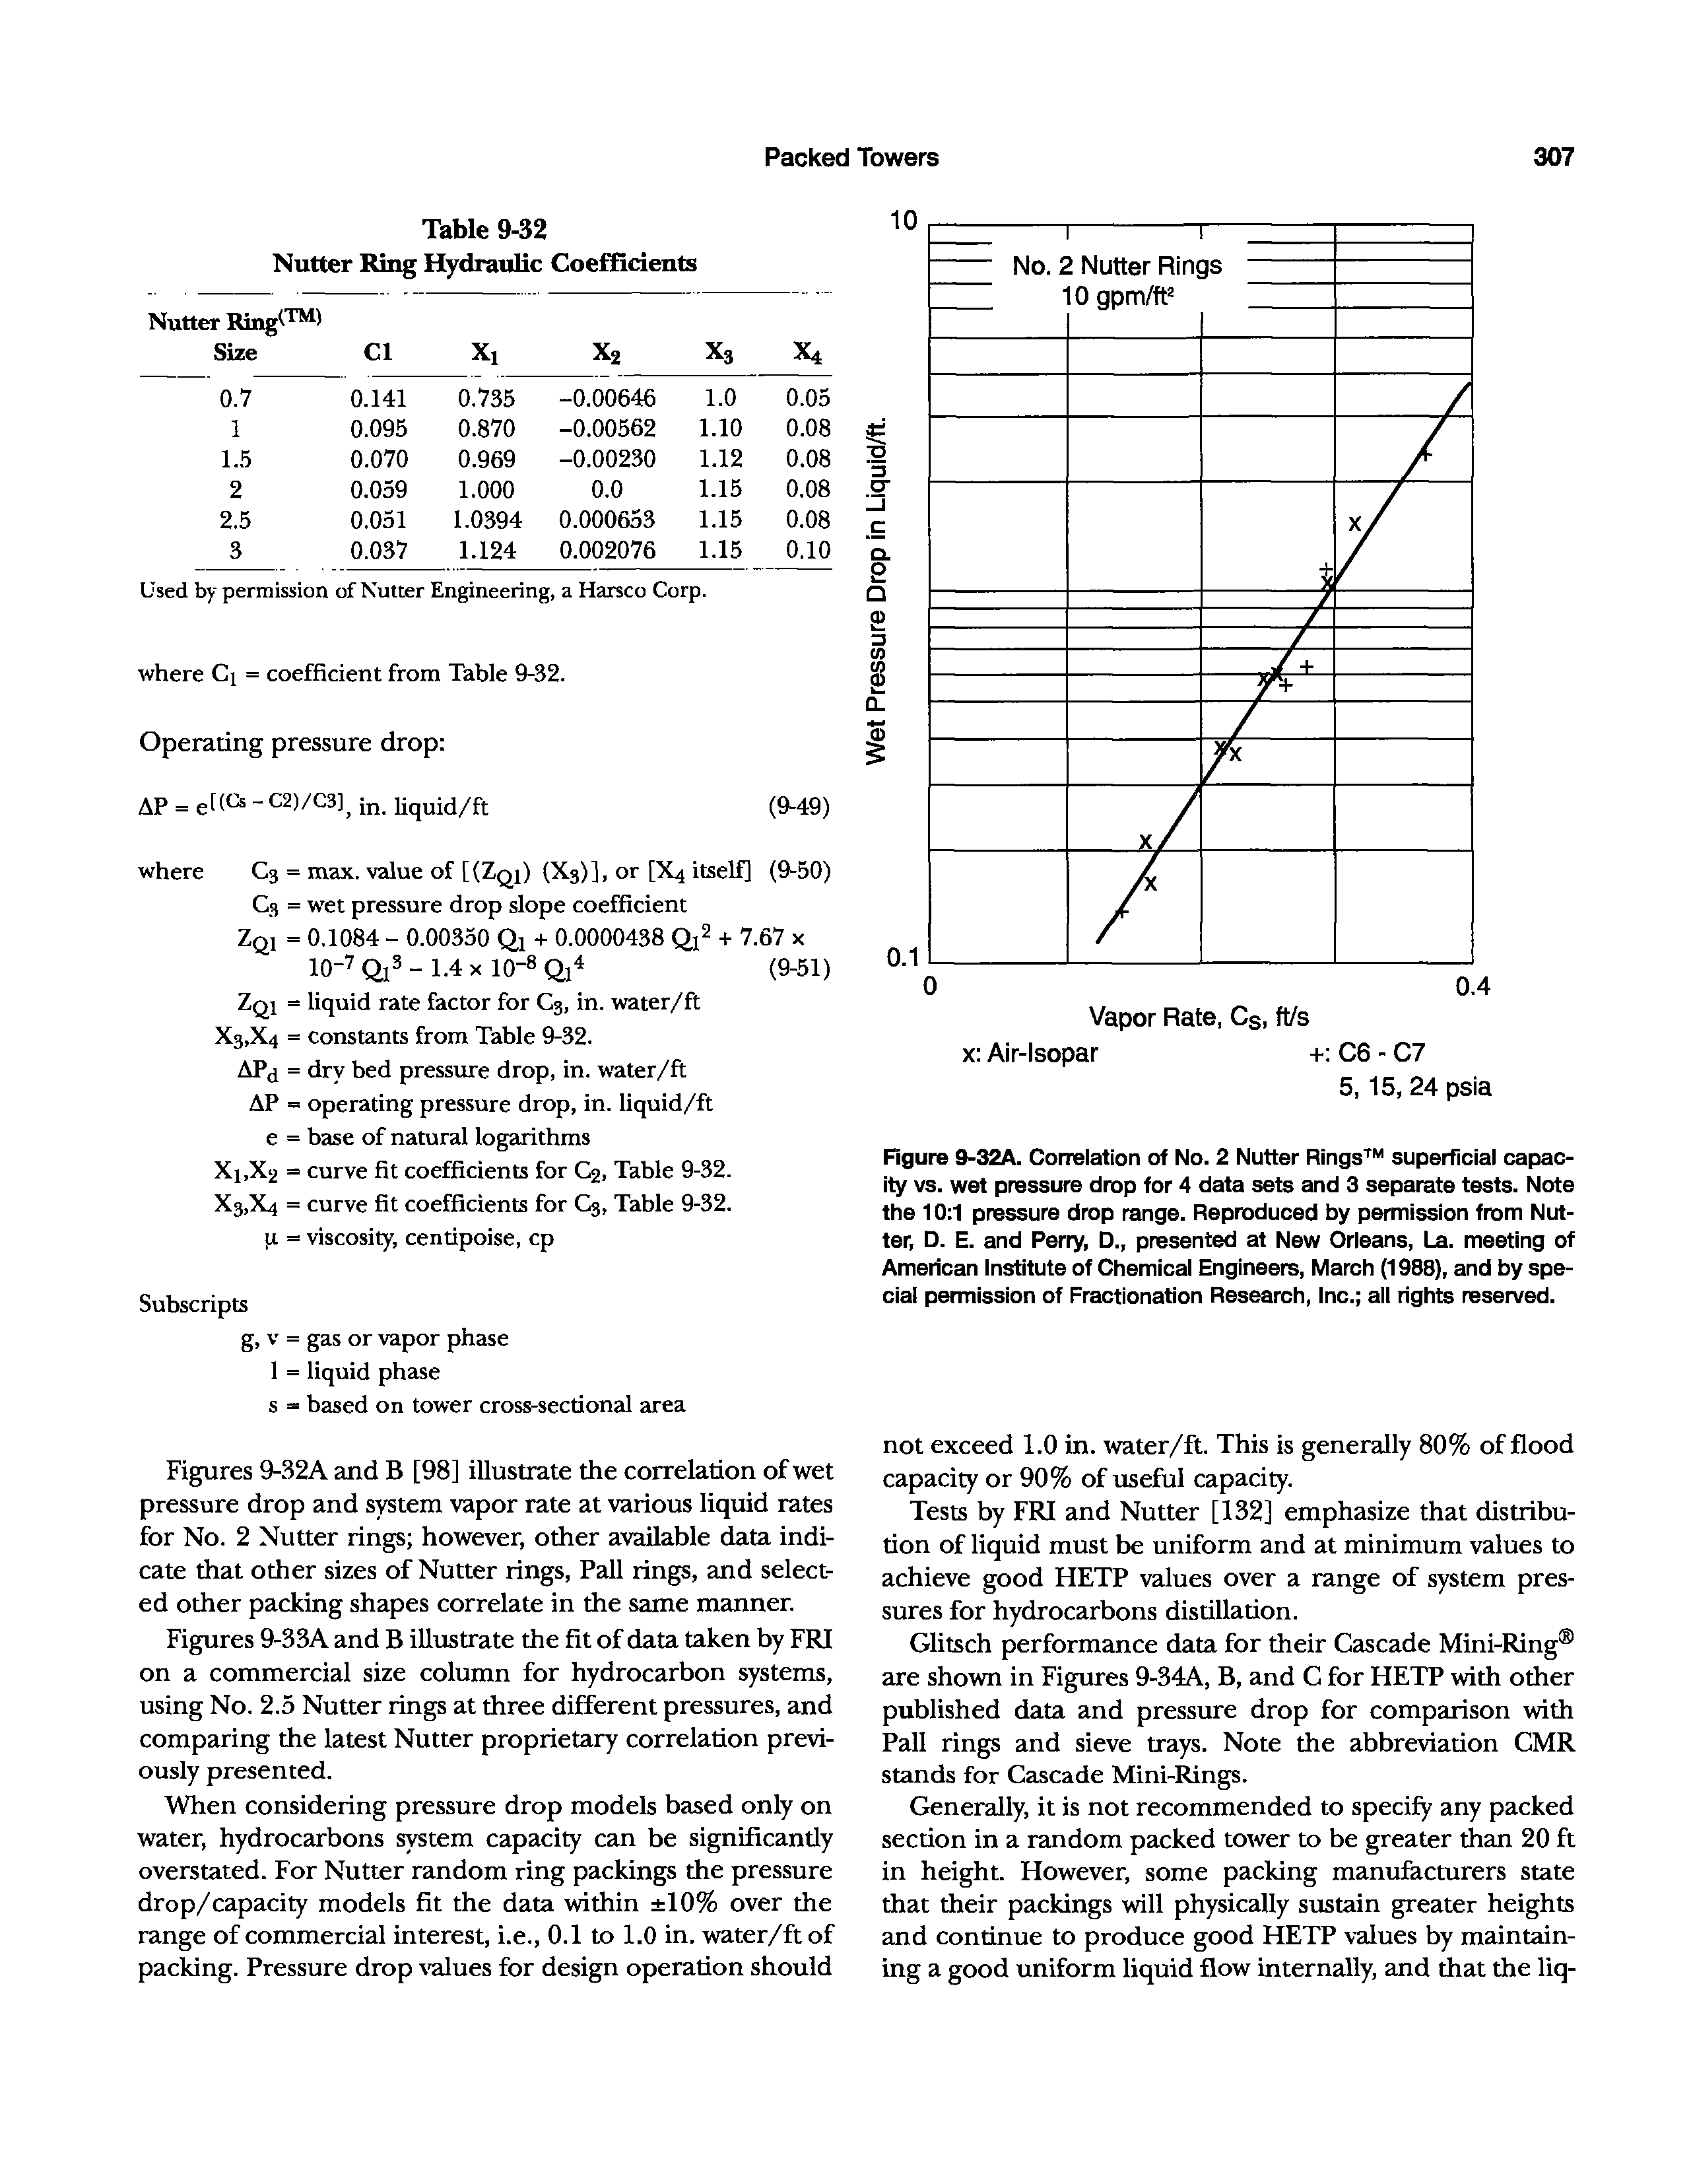 Figures 9-33A and B illustrate the fit of data taken by FRI on a commercial size column for hydrocarbon systems, using No. 2.5 Nutter rings at three different pressures, and comparing the latest Nutter proprietary correlation previously presented.